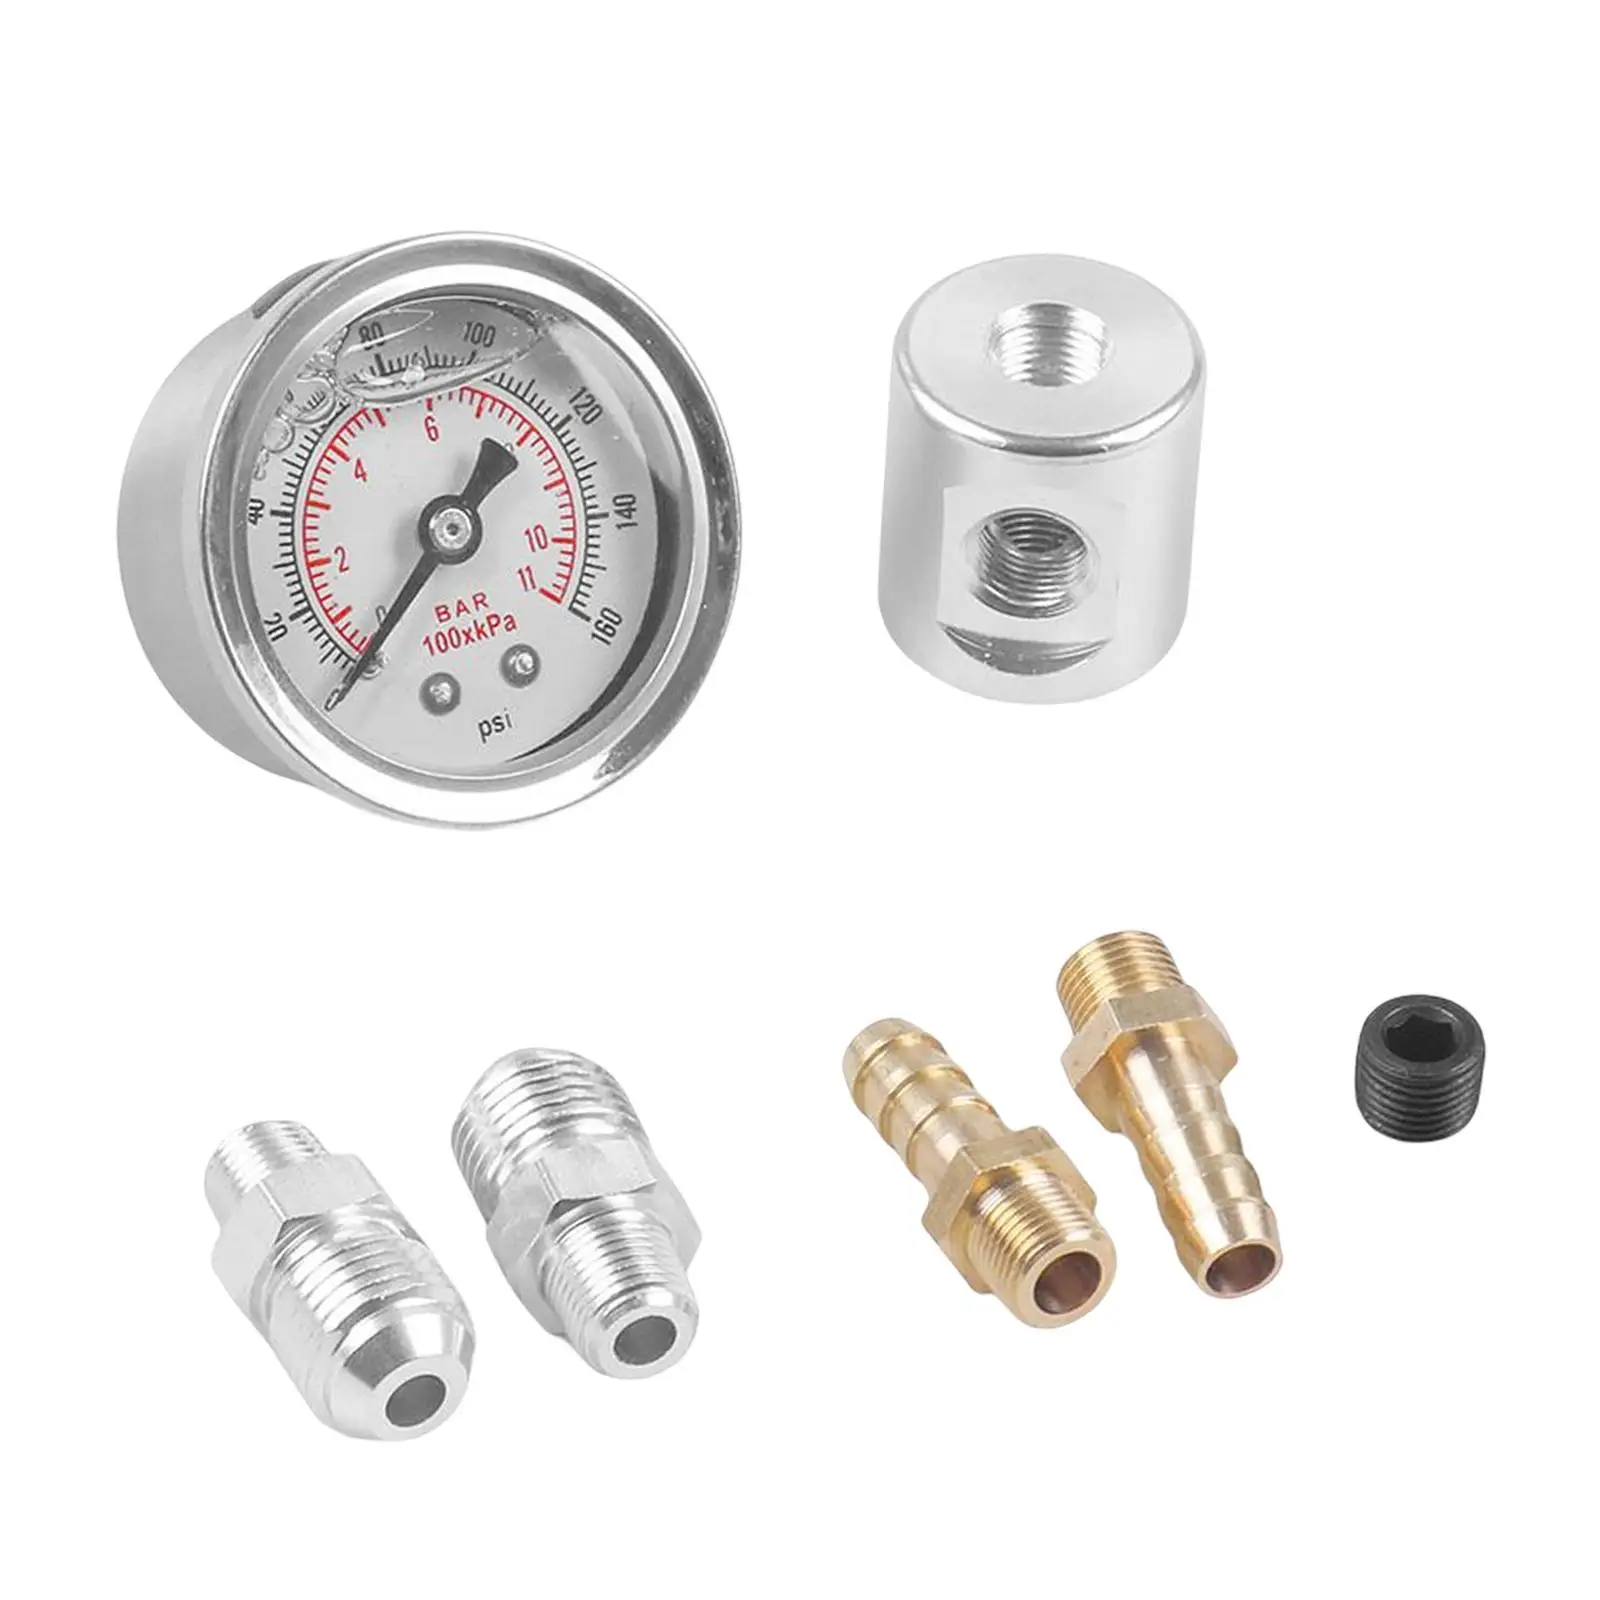 Universal Fuel Pressure Gauge 1/8 NPT Easy to Install Replaces Engine Parts 0-160 PSI Spare Parts Sensor Fits for Honda `88-`00